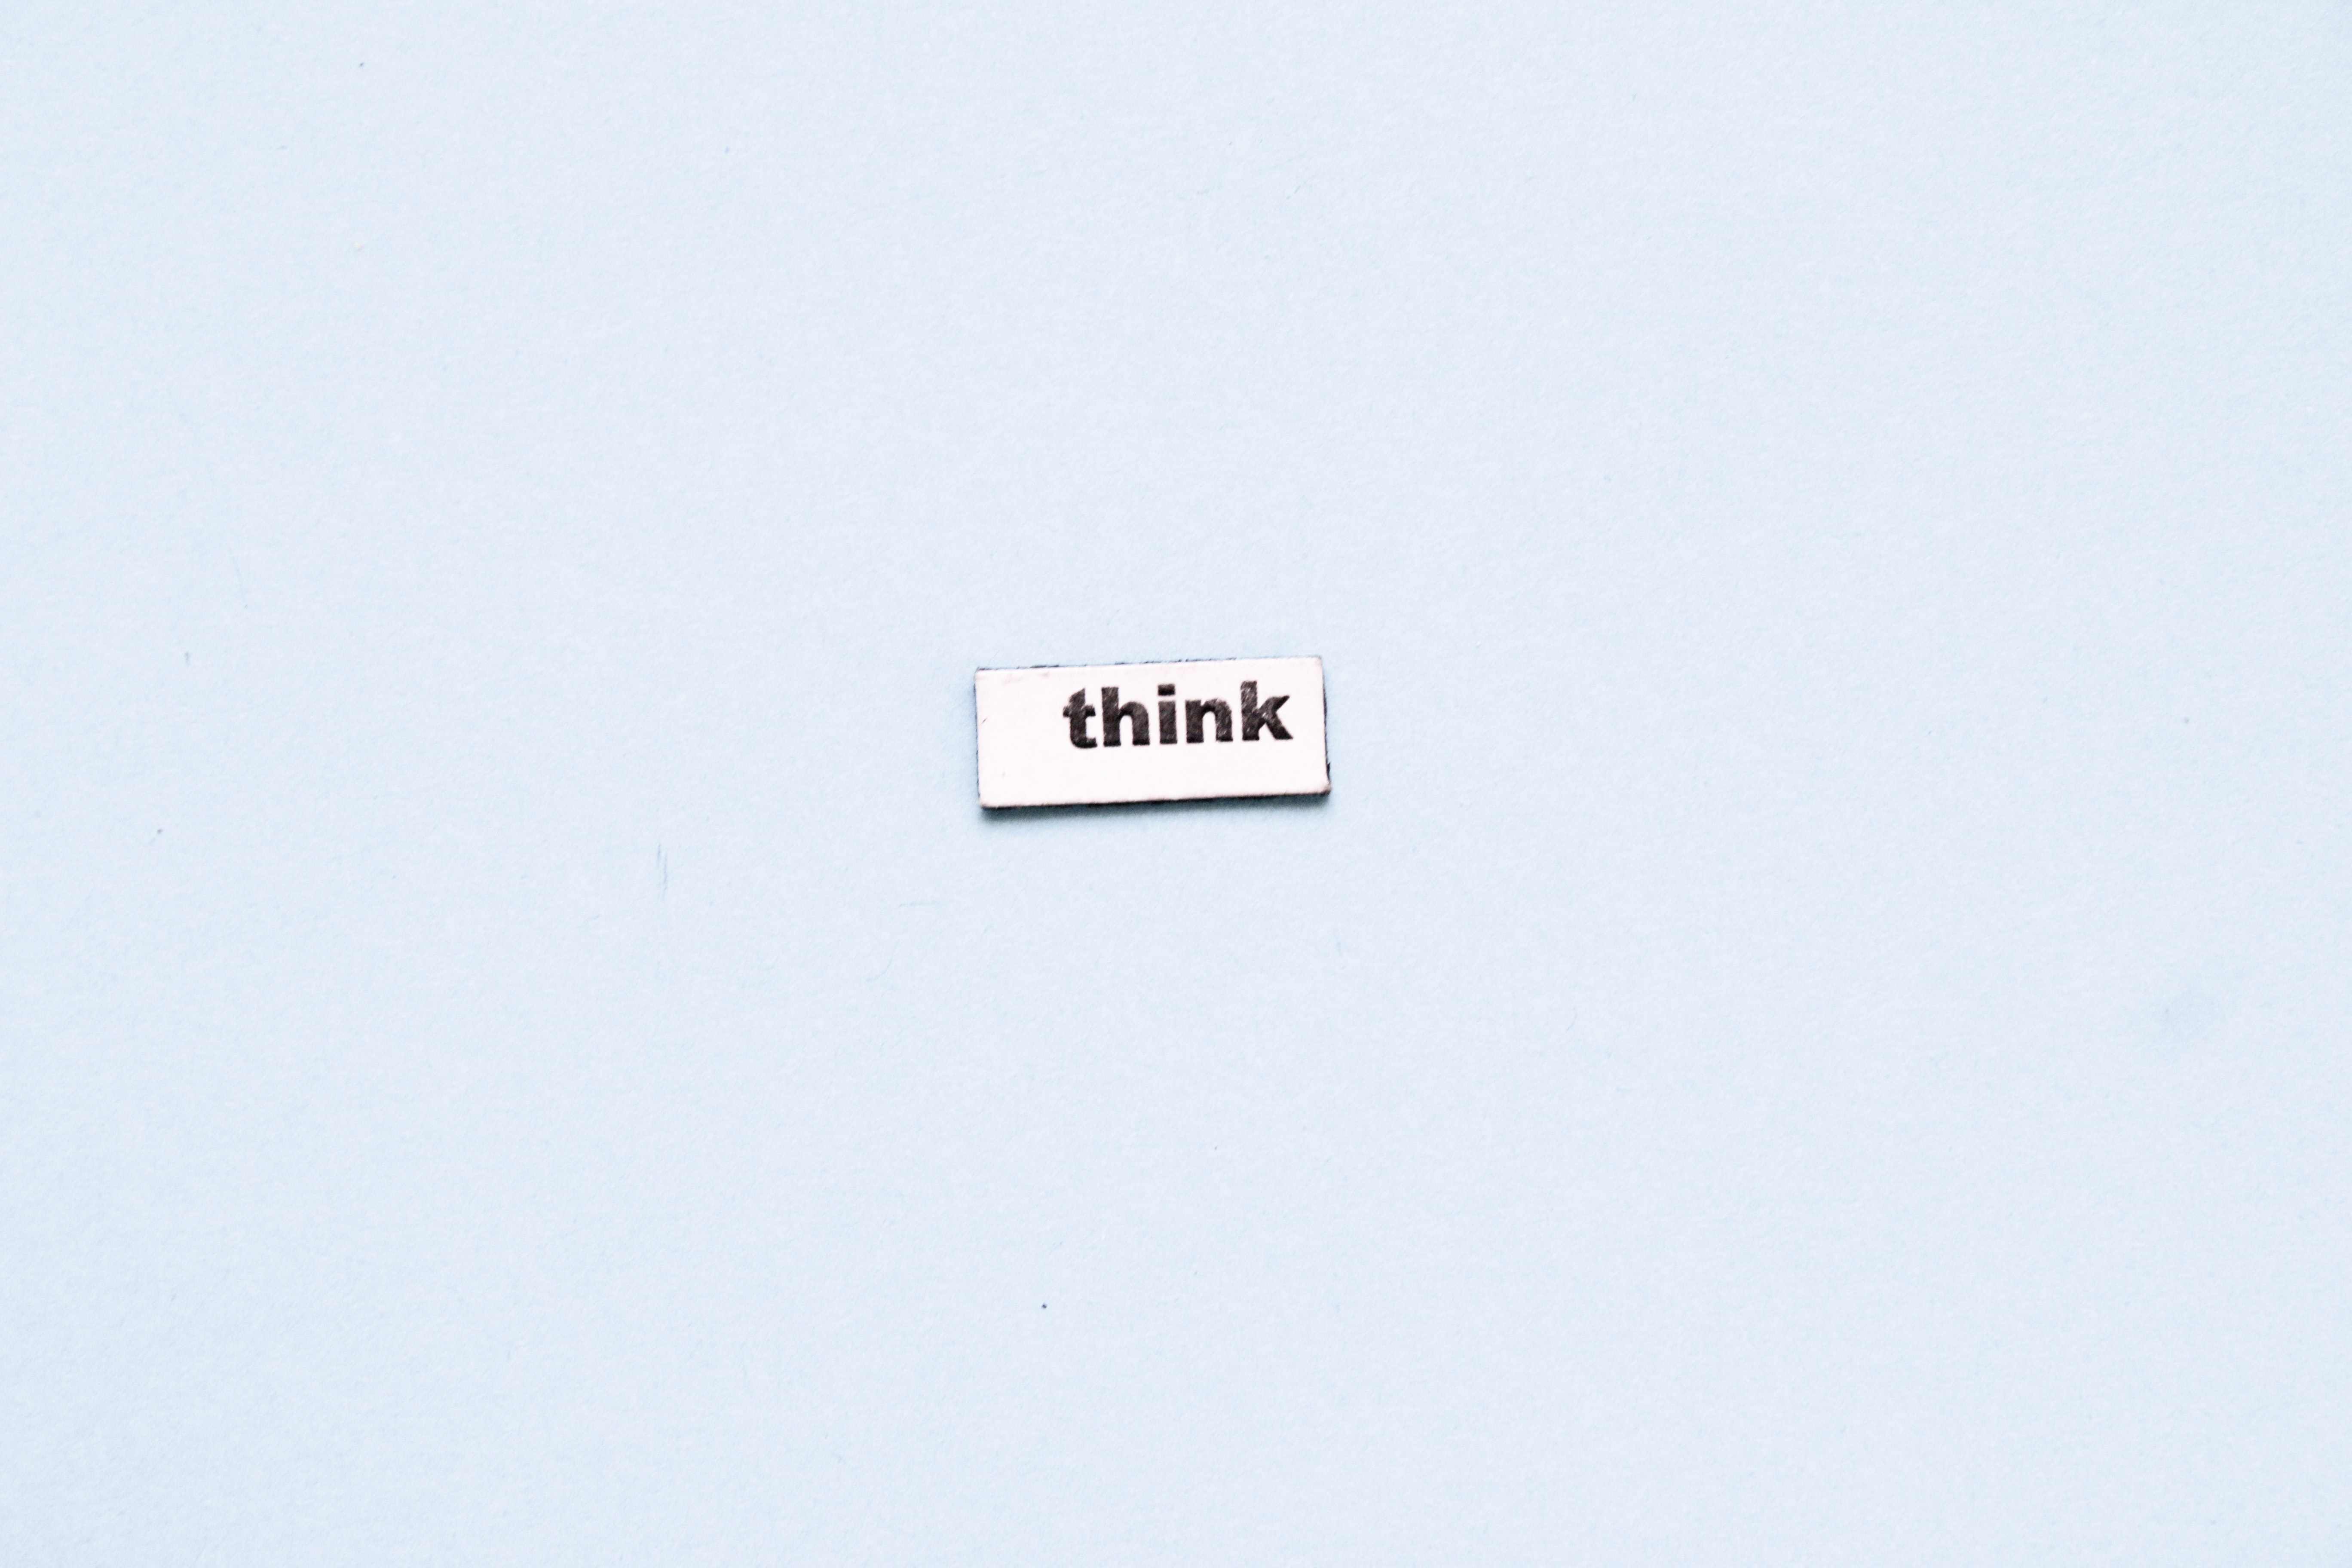 text, words, minimalism, think wallpaper for mobile